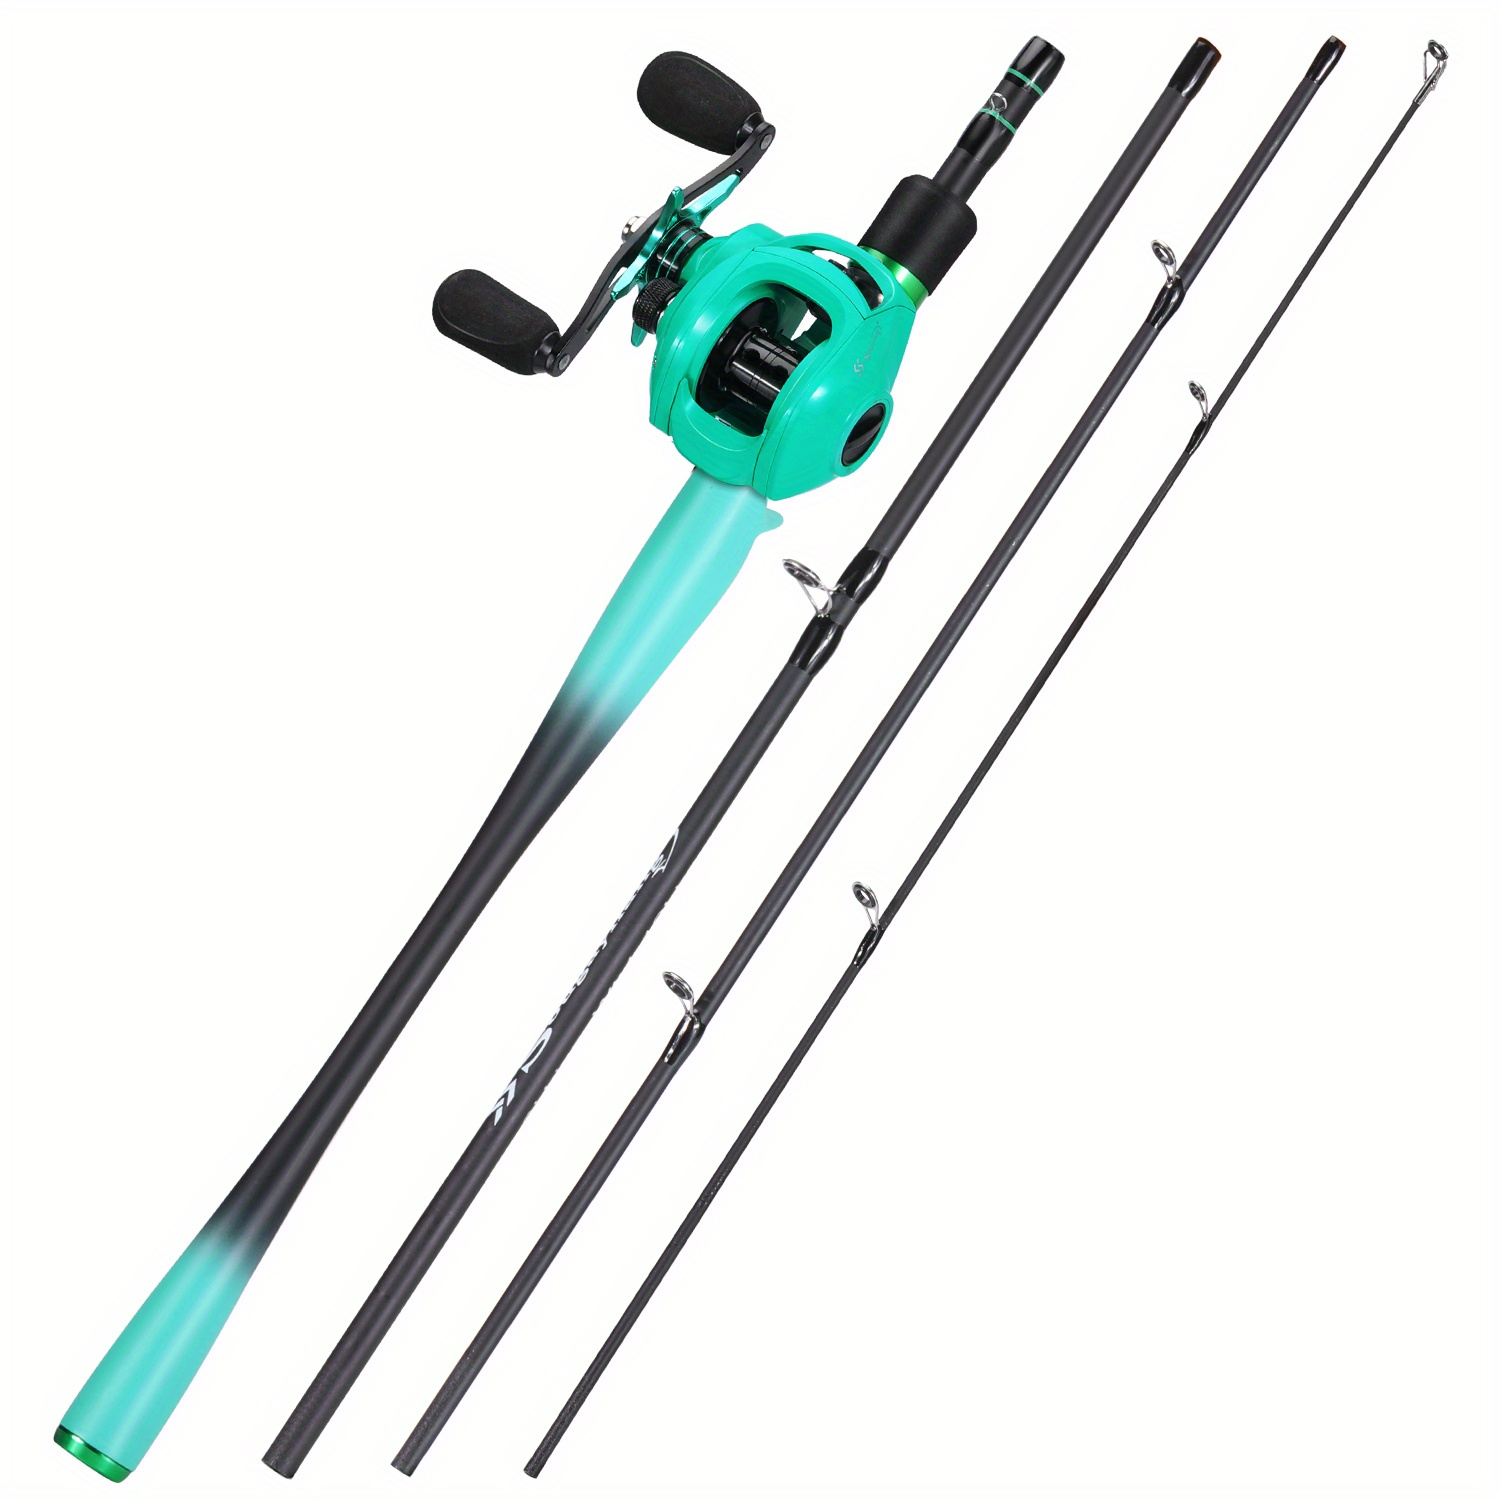 Sougayilang Fishing Rods Reels Full Kit Portable Carbon 4 Pieces Baitcaster  Fishing Pole with Low Profile 18BB Baitcasting Reel Portable Carrier Bag